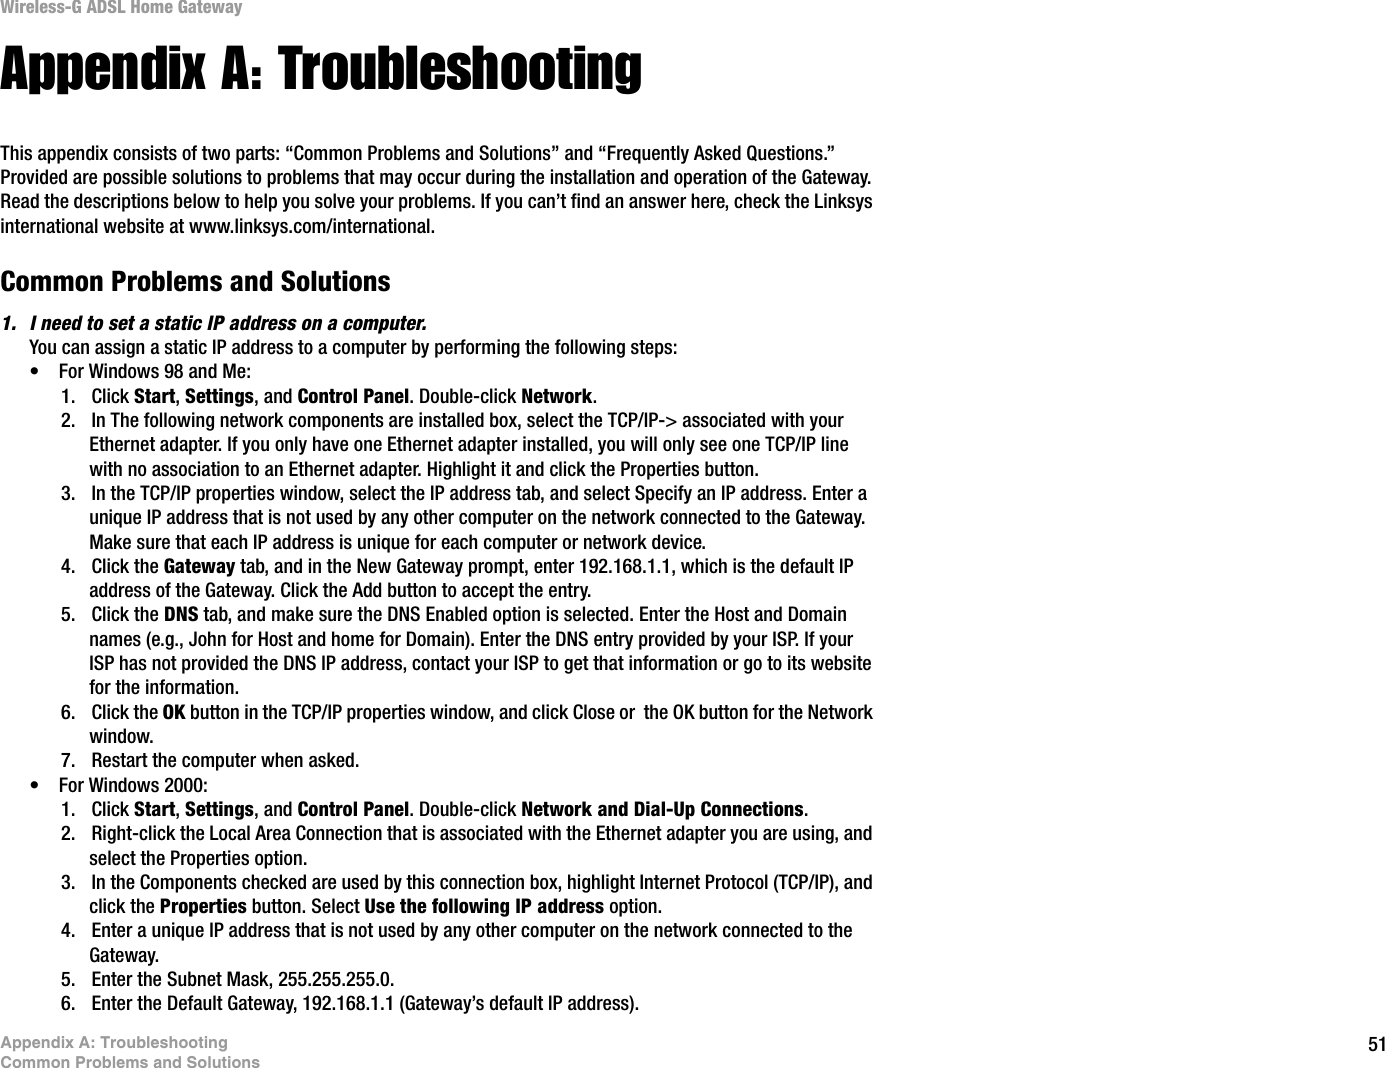 51Appendix A: TroubleshootingCommon Problems and SolutionsWireless-G ADSL Home GatewayAppendix A: TroubleshootingThis appendix consists of two parts: “Common Problems and Solutions” and “Frequently Asked Questions.” Provided are possible solutions to problems that may occur during the installation and operation of the Gateway. Read the descriptions below to help you solve your problems. If you can’t find an answer here, check the Linksys international website at www.linksys.com/international.Common Problems and Solutions1. I need to set a static IP address on a computer.You can assign a static IP address to a computer by performing the following steps:• For Windows 98 and Me:1. Click Start,Settings, and Control Panel. Double-click Network.2. In The following network components are installed box, select the TCP/IP-&gt; associated with your Ethernet adapter. If you only have one Ethernet adapter installed, you will only see one TCP/IP line with no association to an Ethernet adapter. Highlight it and click the Properties button.3. In the TCP/IP properties window, select the IP address tab, and select Specify an IP address. Enter a unique IP address that is not used by any other computer on the network connected to the Gateway. Make sure that each IP address is unique for each computer or network device.4. Click the Gateway tab, and in the New Gateway prompt, enter 192.168.1.1, which is the default IP address of the Gateway. Click the Add button to accept the entry.5. Click the DNS tab, and make sure the DNS Enabled option is selected. Enter the Host and Domain names (e.g., John for Host and home for Domain). Enter the DNS entry provided by your ISP. If your ISP has not provided the DNS IP address, contact your ISP to get that information or go to its website for the information.6. Click the OK button in the TCP/IP properties window, and click Close or  the OK button for the Network window.7. Restart the computer when asked.• For Windows 2000:1. Click Start,Settings, and Control Panel. Double-click Network and Dial-Up Connections.2. Right-click the Local Area Connection that is associated with the Ethernet adapter you are using, and select the Properties option.3. In the Components checked are used by this connection box, highlight Internet Protocol (TCP/IP), and click the Properties button. Select Use the following IP address option.4. Enter a unique IP address that is not used by any other computer on the network connected to the Gateway. 5. Enter the Subnet Mask, 255.255.255.0.6. Enter the Default Gateway, 192.168.1.1 (Gateway’s default IP address).